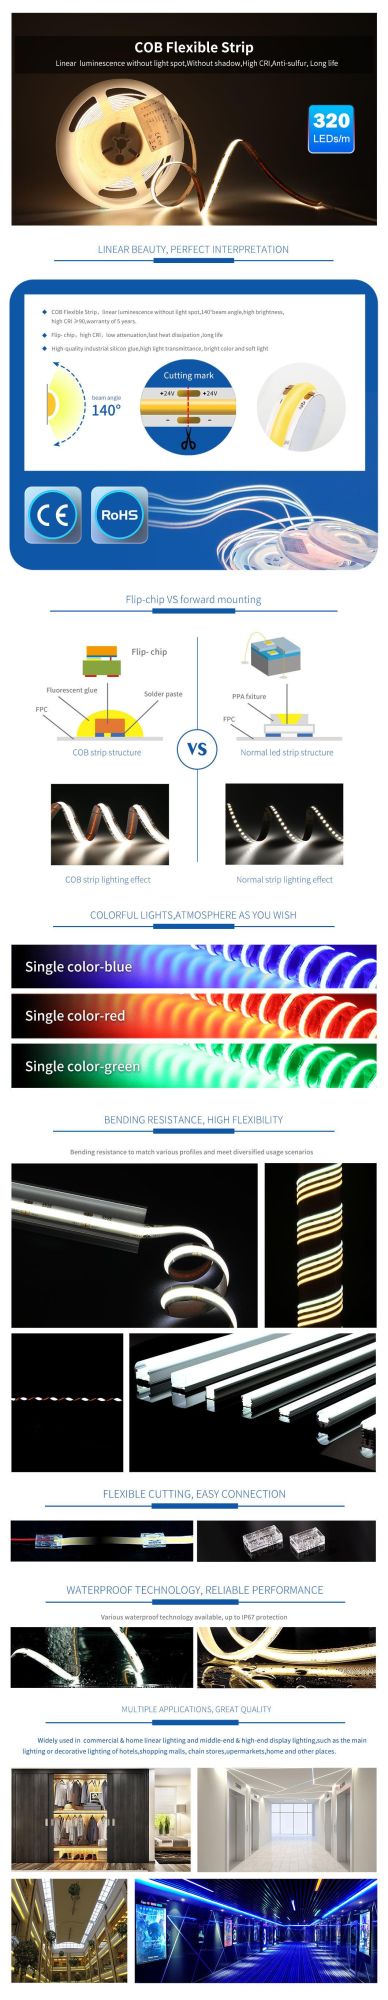 Hot Low Price 24V 320 LED RGB COB LED Strip with One Bin Only